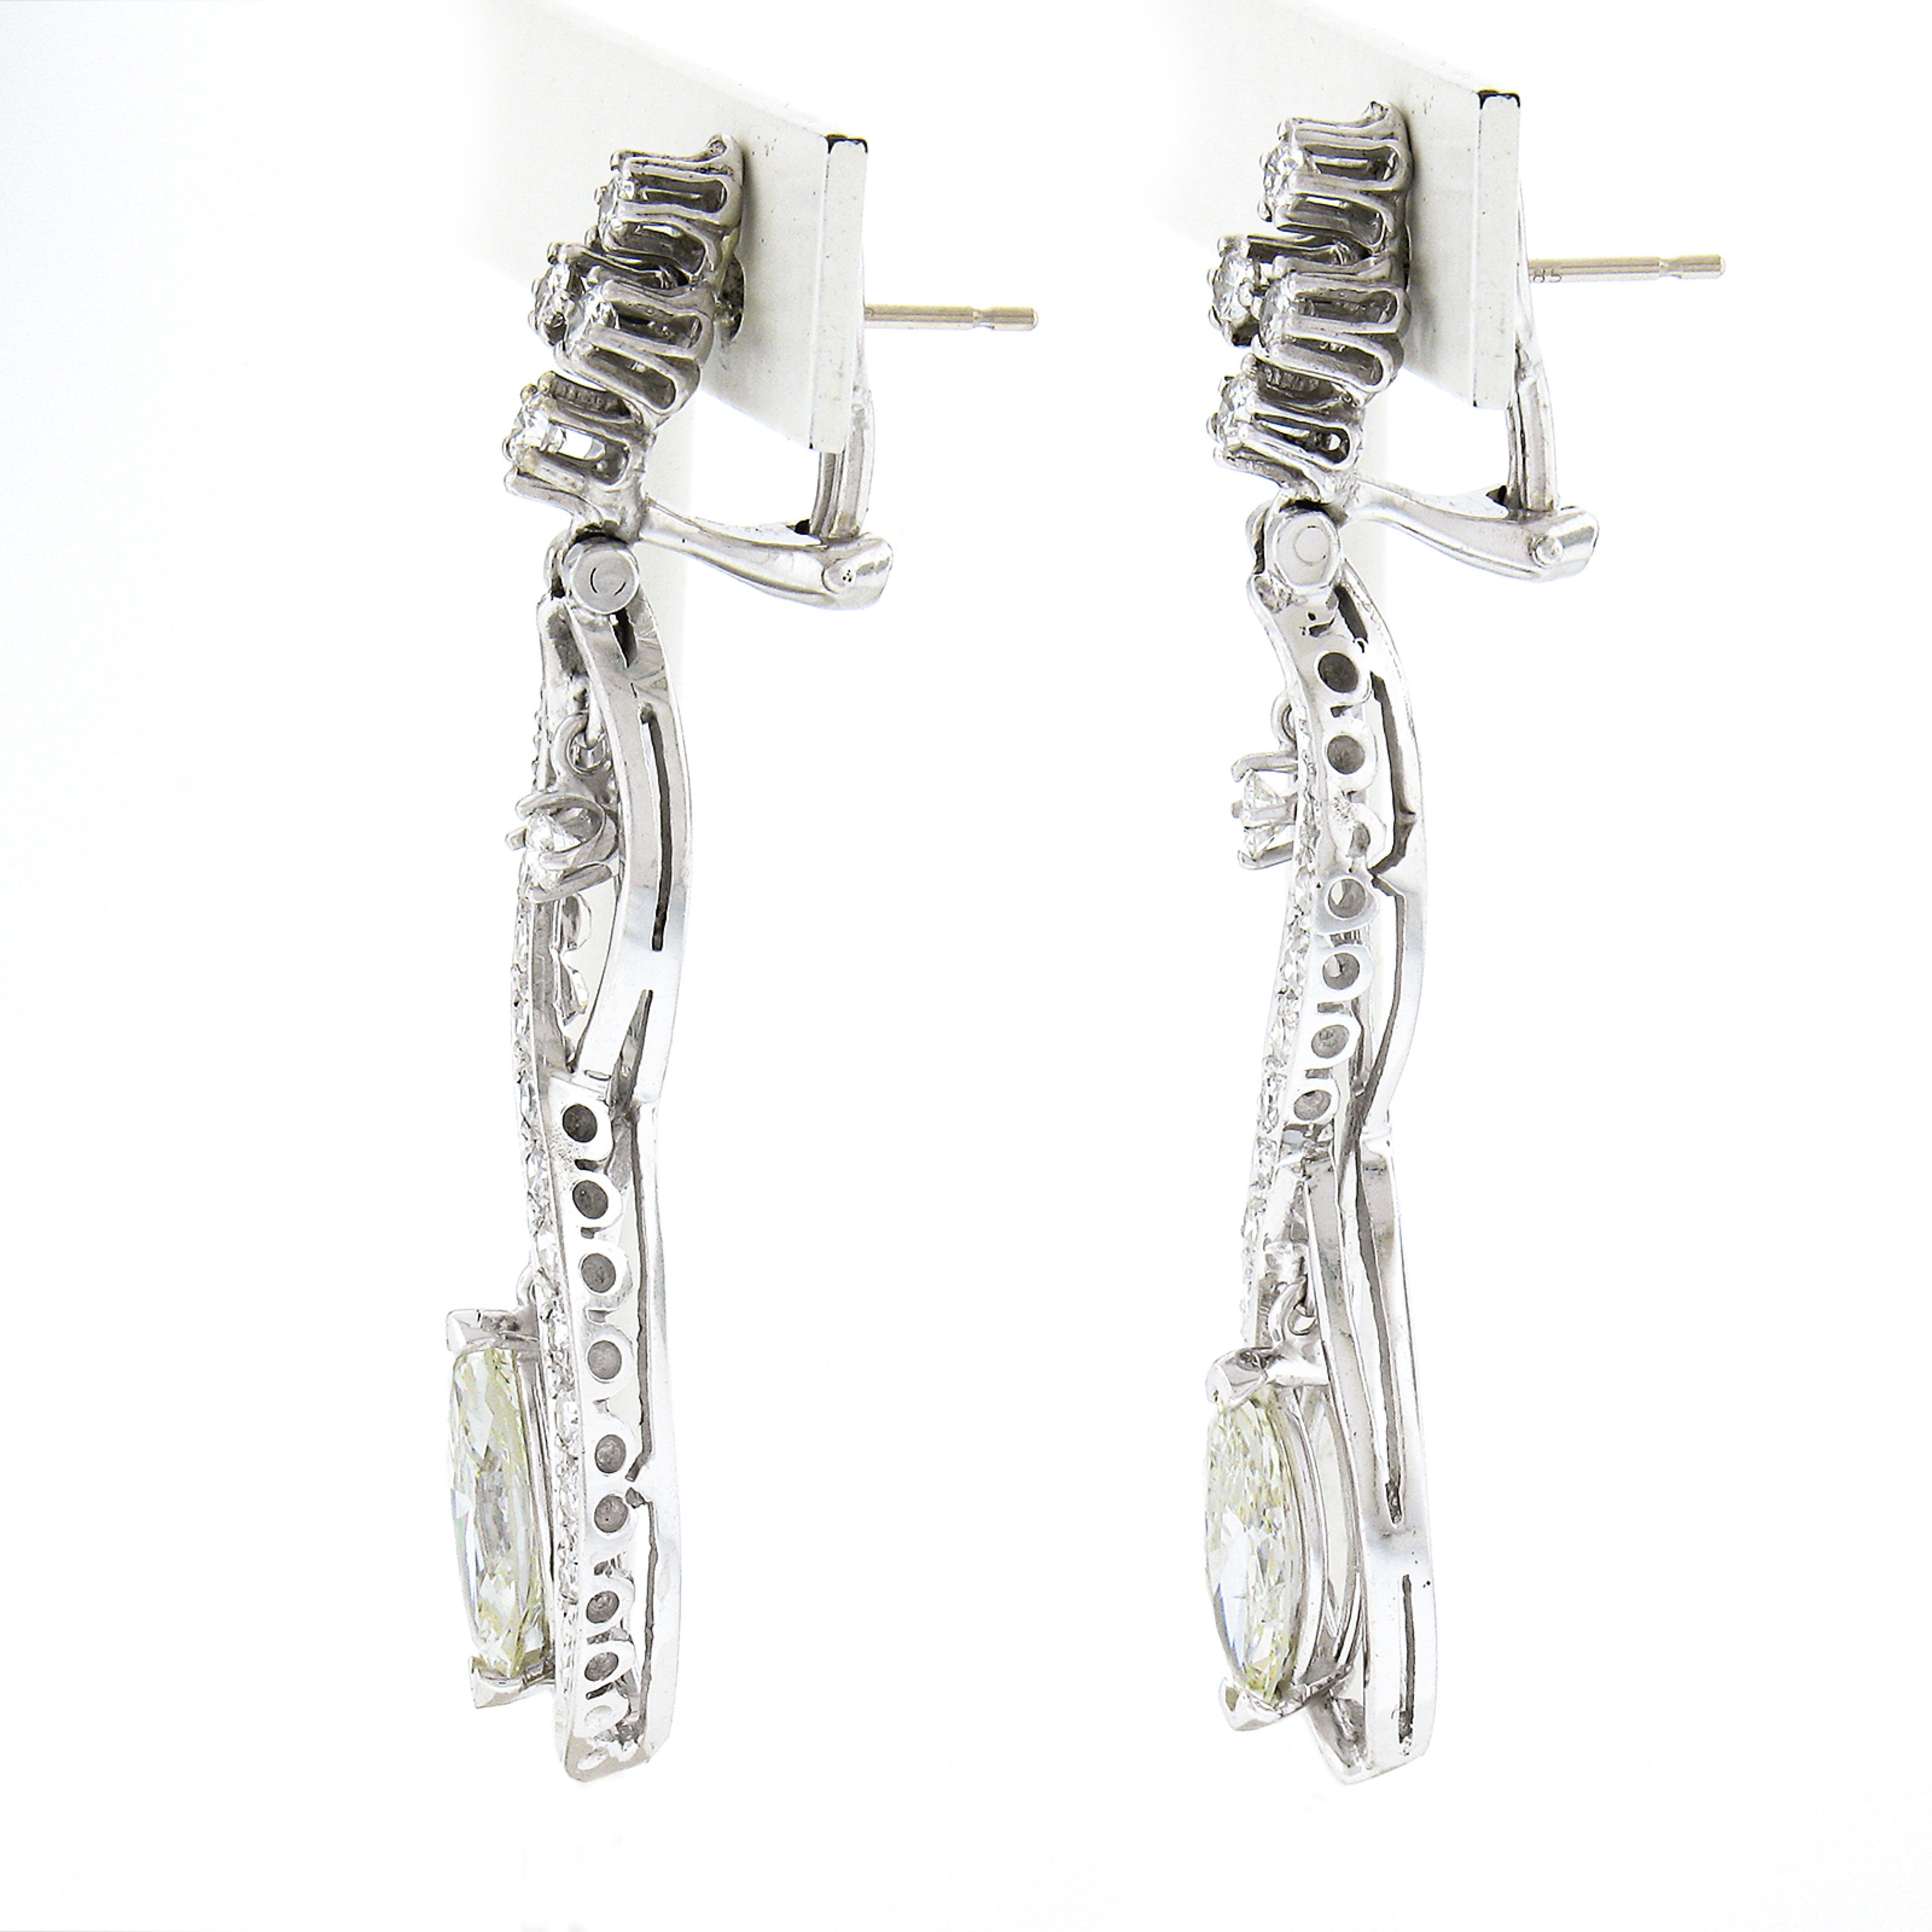 This breathtaking pair of vintage statement diamond dangle earrings is crafted in solid 14k white gold and features approximately 4 carats of very fine quality diamonds throughout. The long infinity design gently dangles from the top portion of the